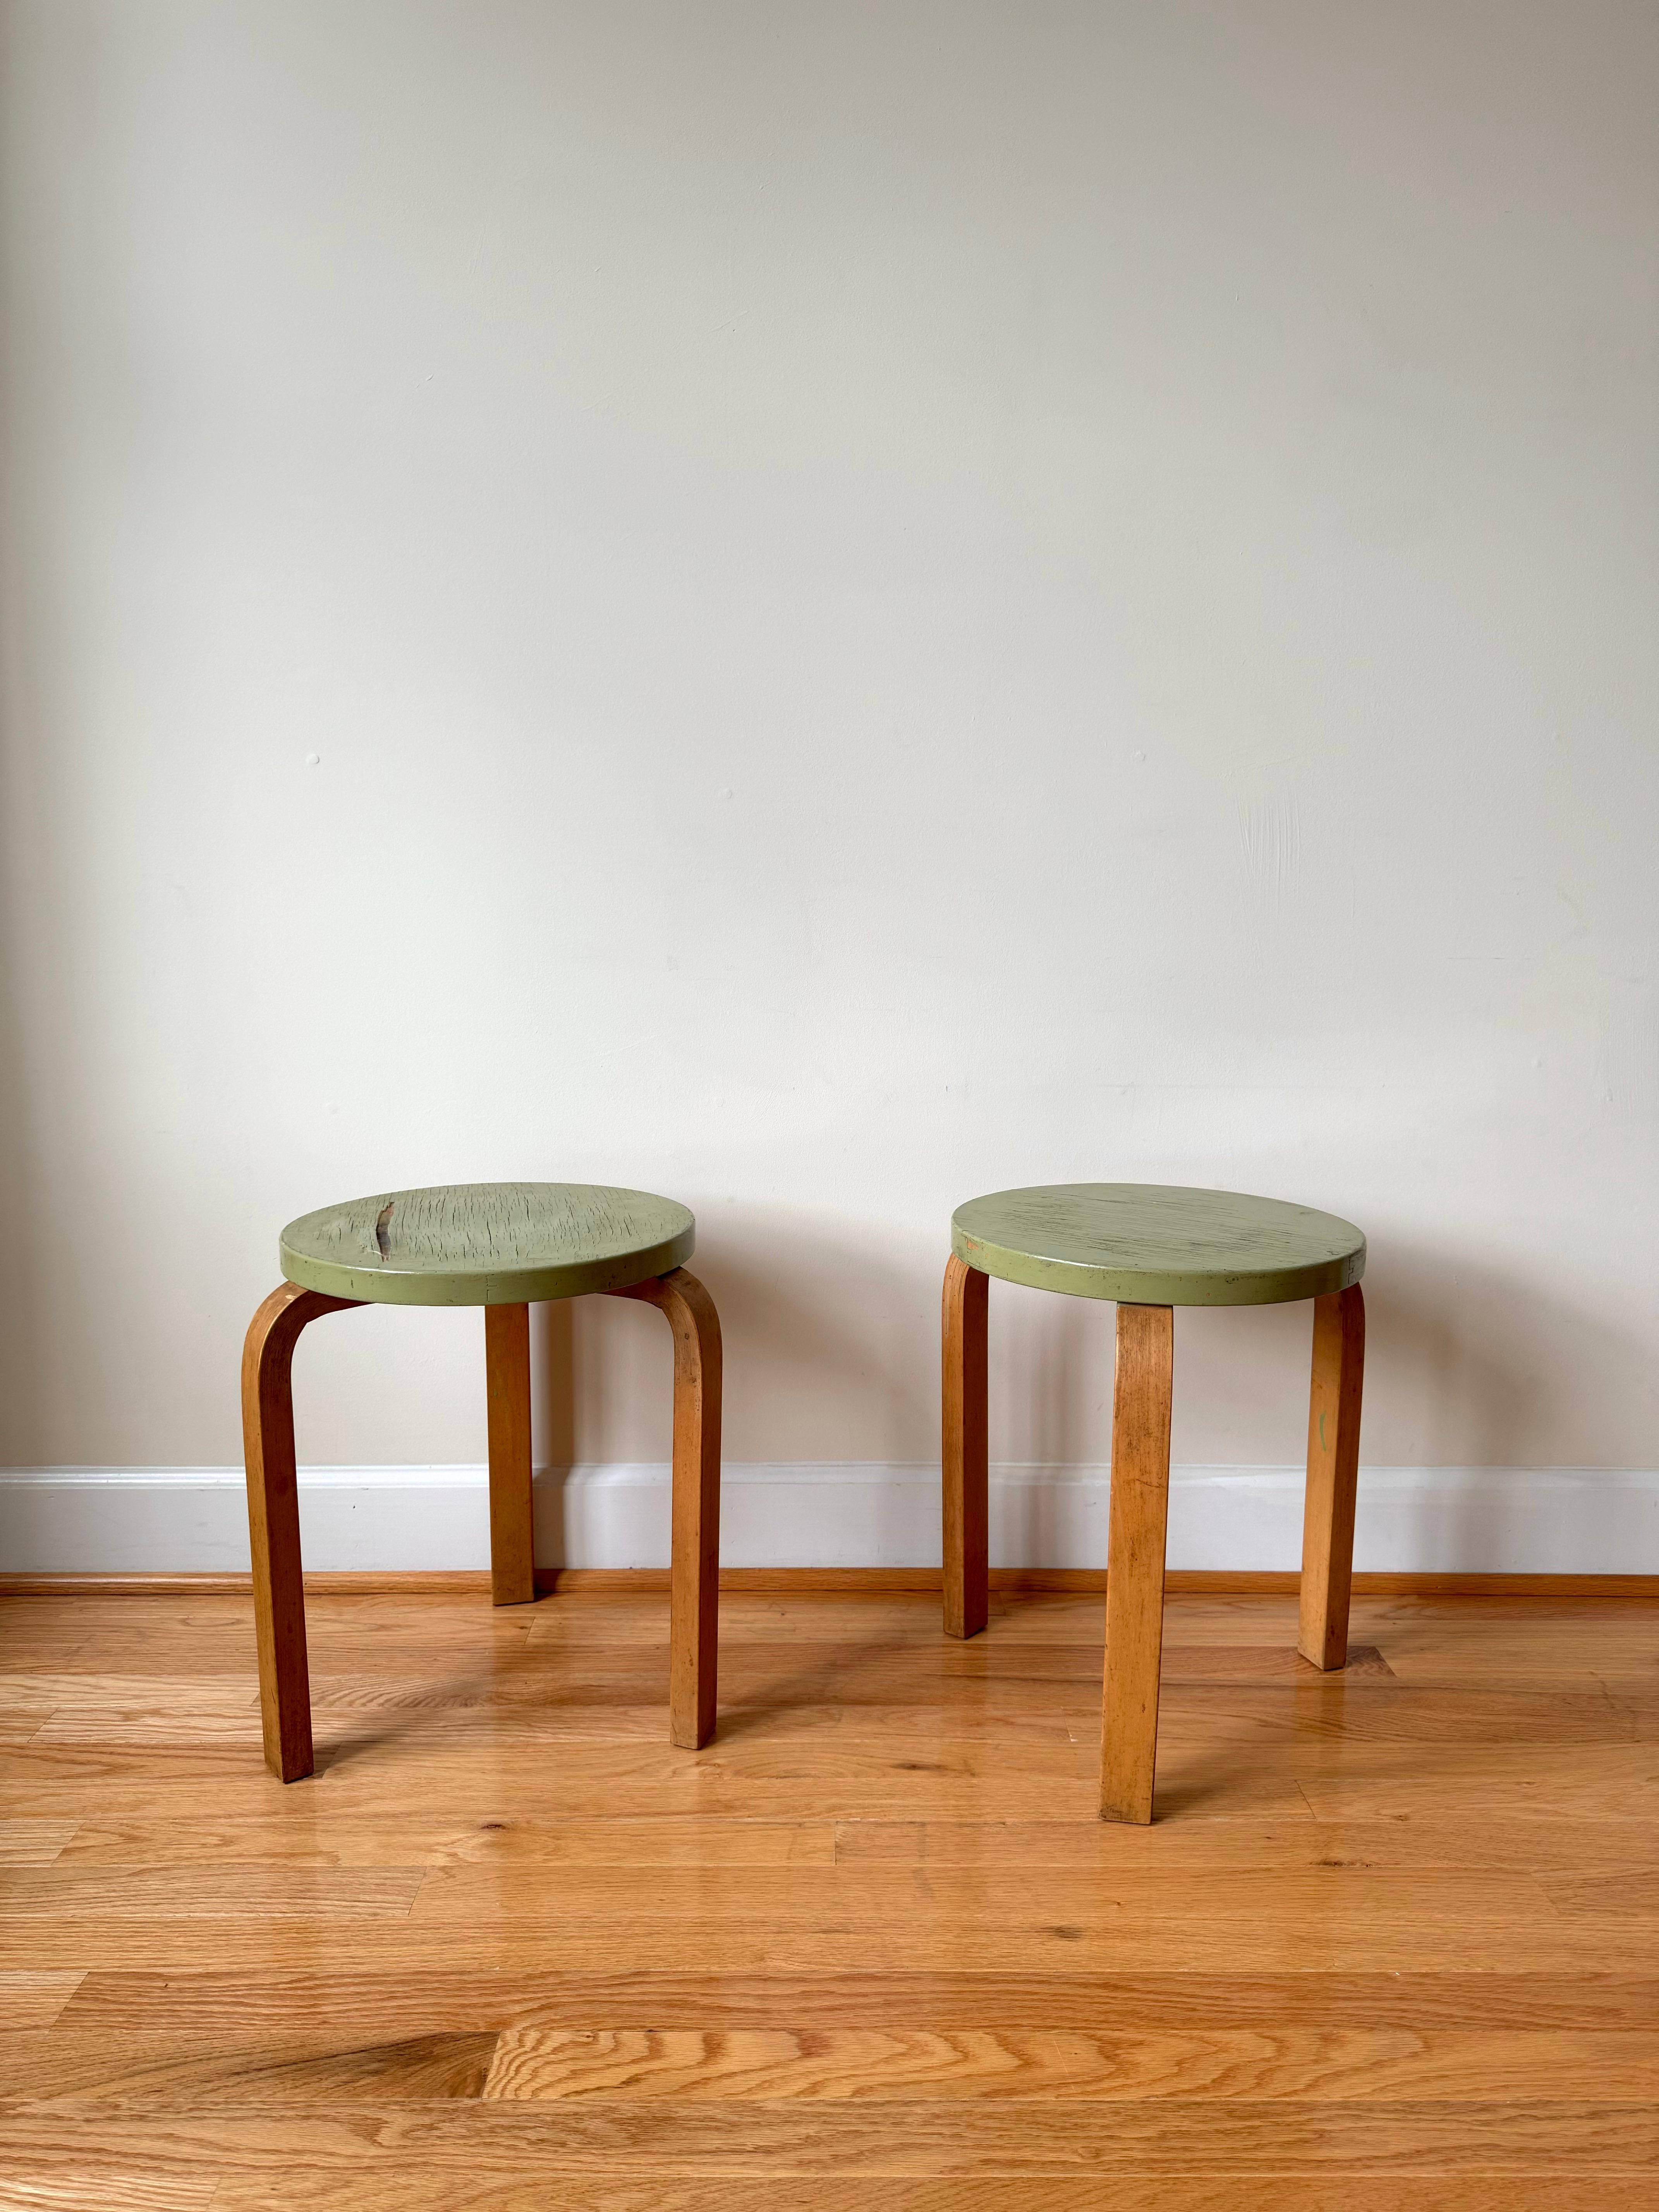 1930-40s model with four slits in the L-legs and a finger-joint detail on the seat.
Date of Manufacture: circa 1930-40s

Alvar Aalto's iconic Stool 60 is the most elemental of furniture pieces, equally suitable as a seat, a table, storage unit, or